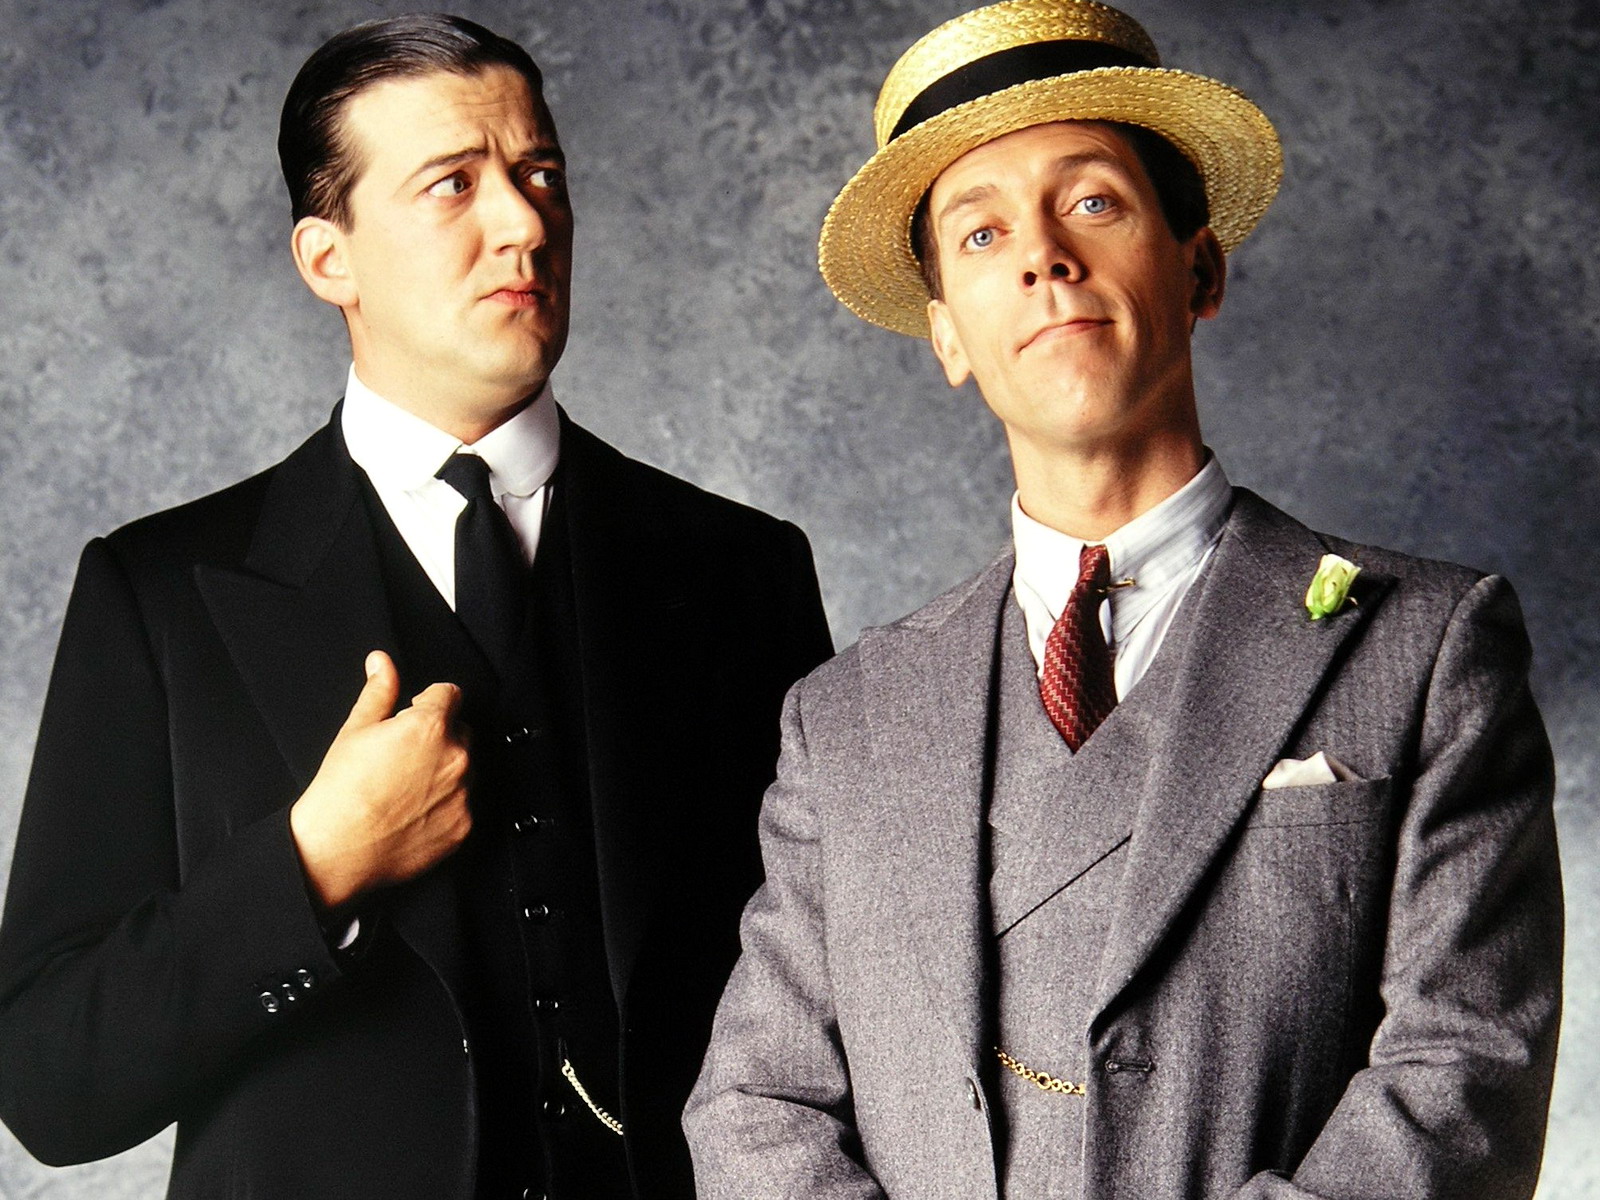 Download HQ Jeeves and Wooster wallpaper / Movies / 1600x1200